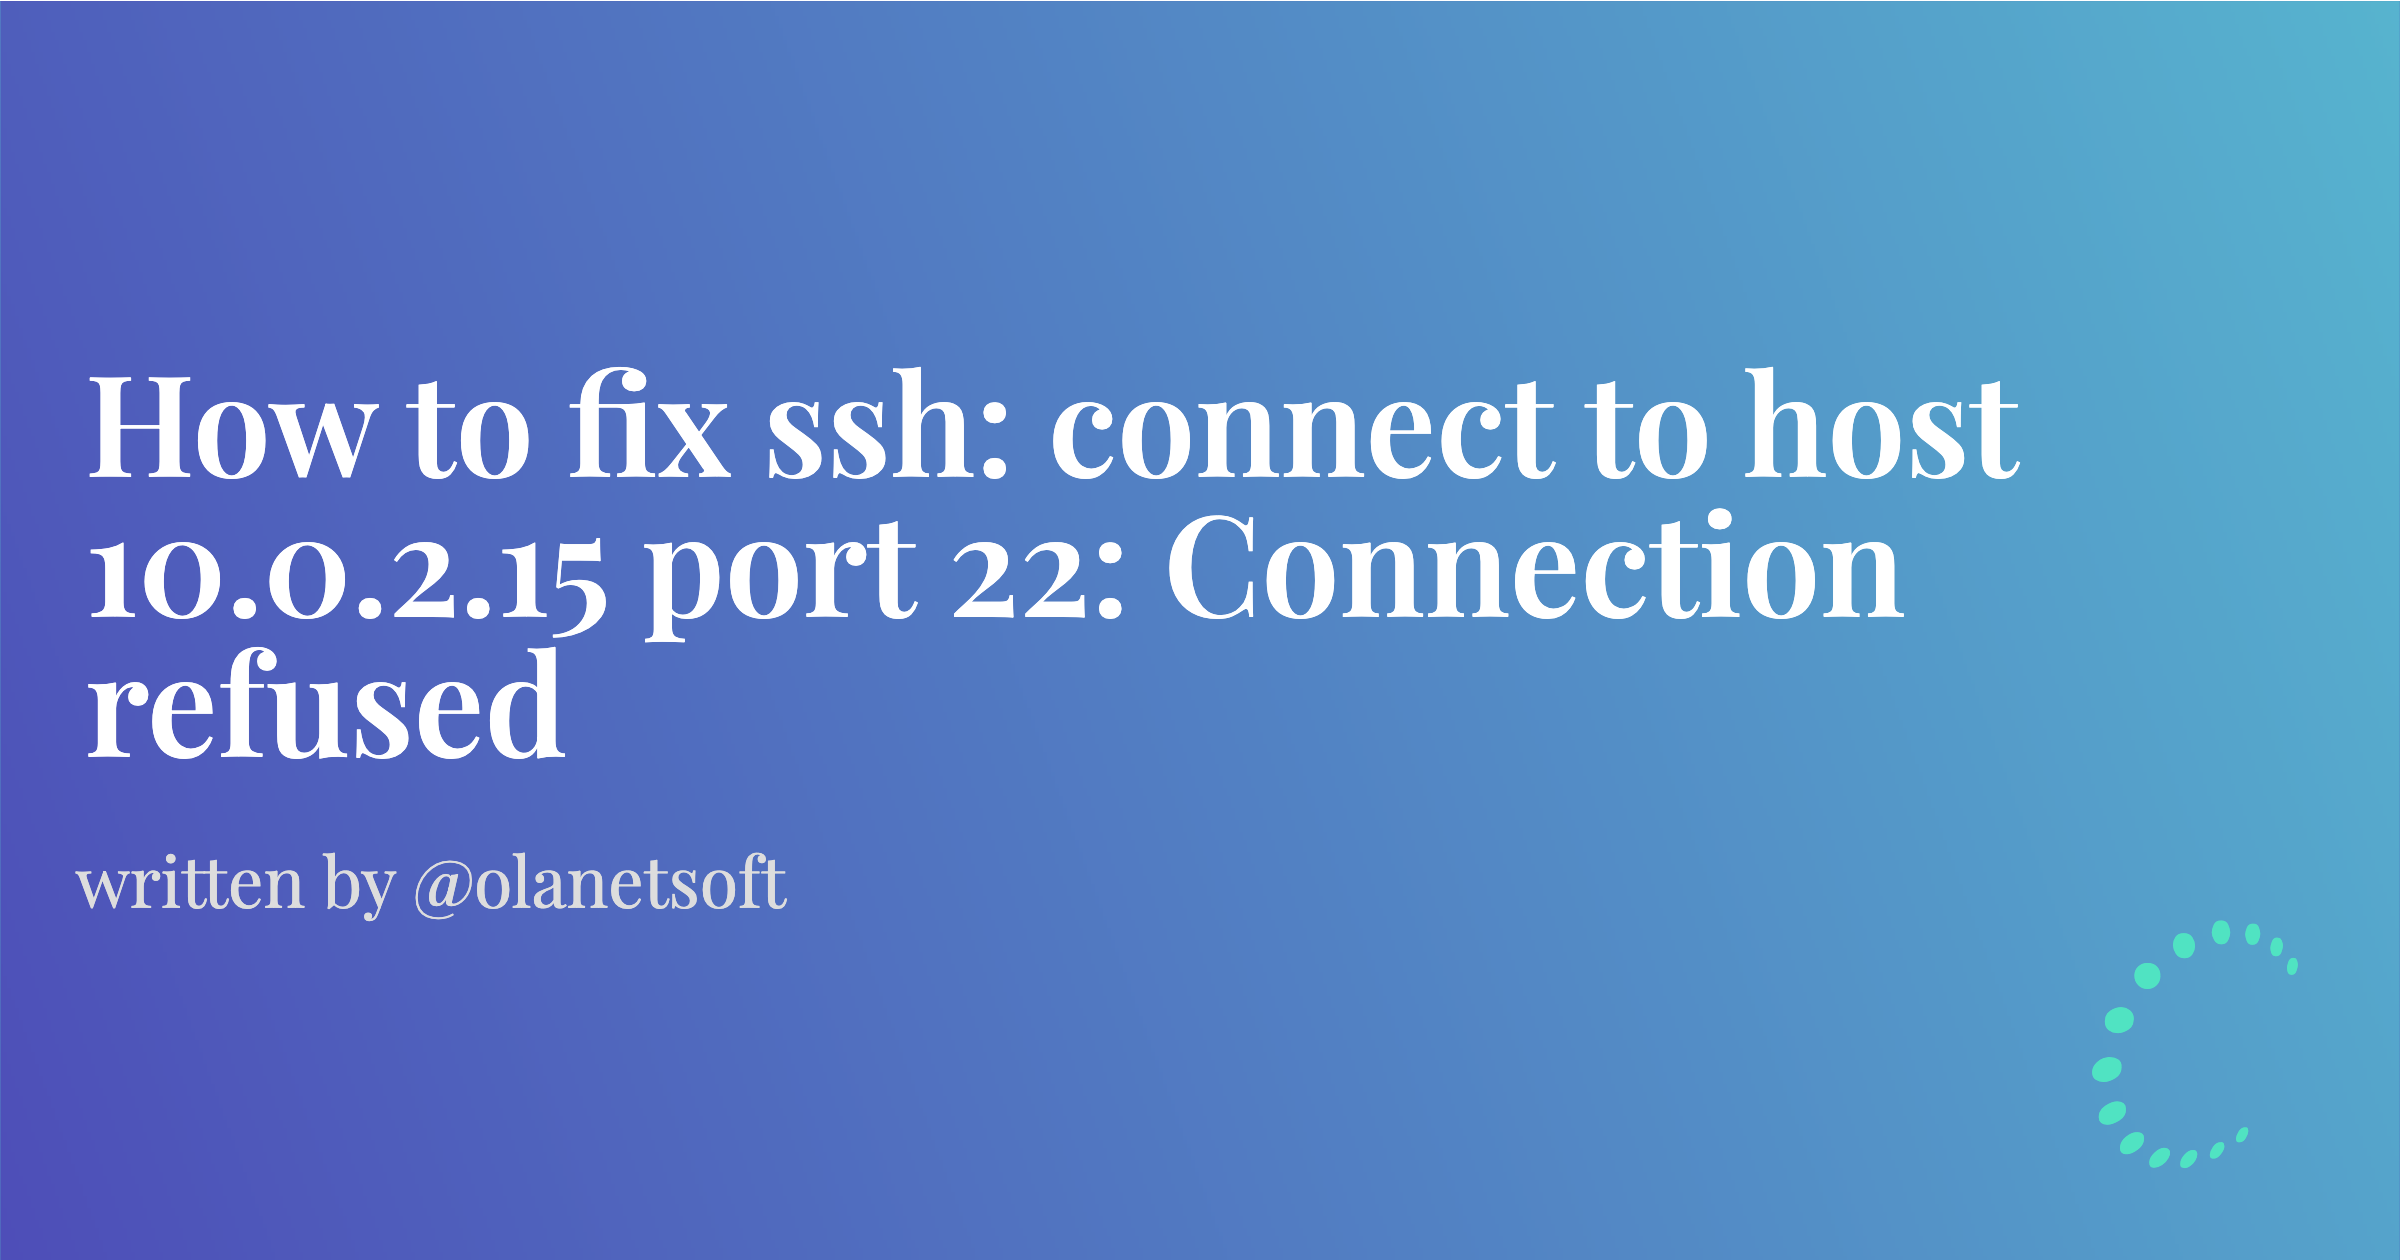 SSH: connect to host 5.187.7.162 Port 22: connection timed out. Ssh connect to host port 22